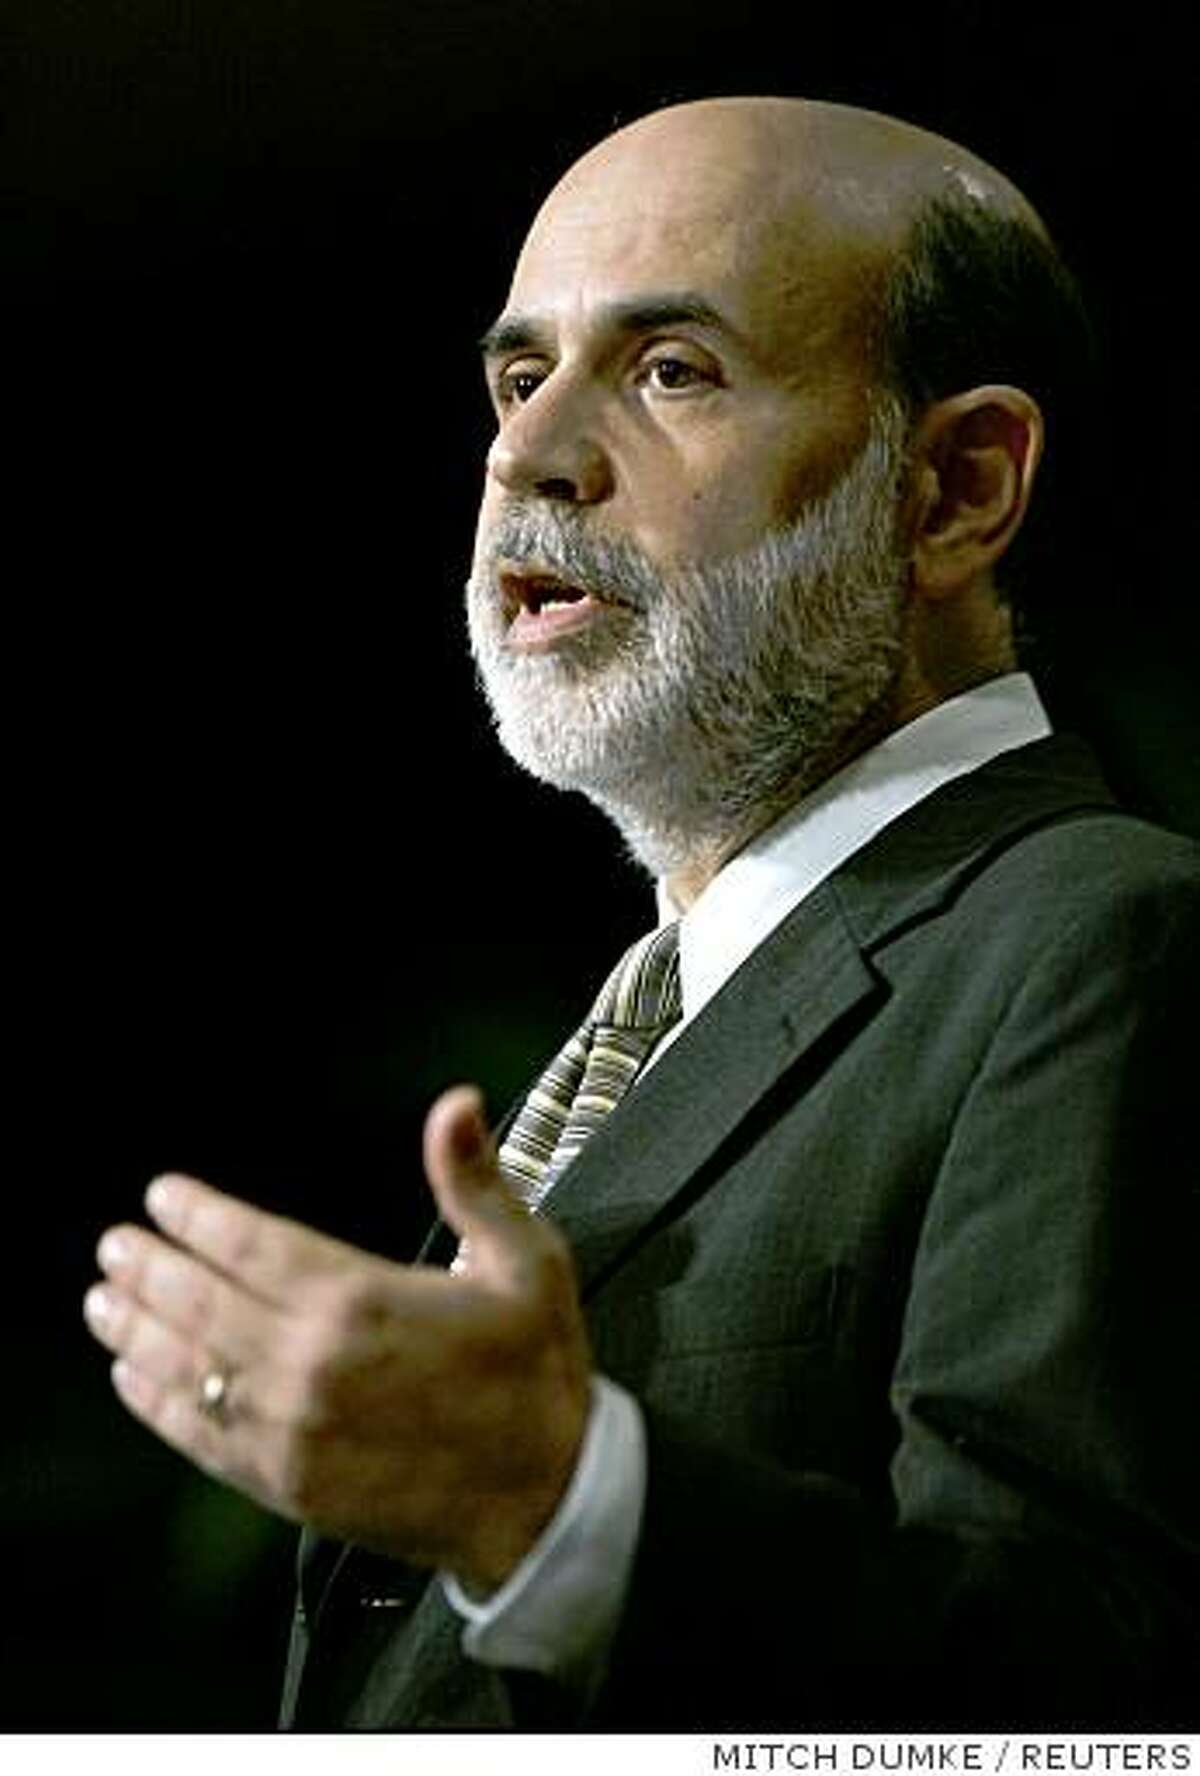 U.S. Federal Reserve Chairman Ben Bernanke speaks to the National Association for Business Economics (NABE) about the current state of the economy in Washington, on Tuesday, Oct. 7, 2008.